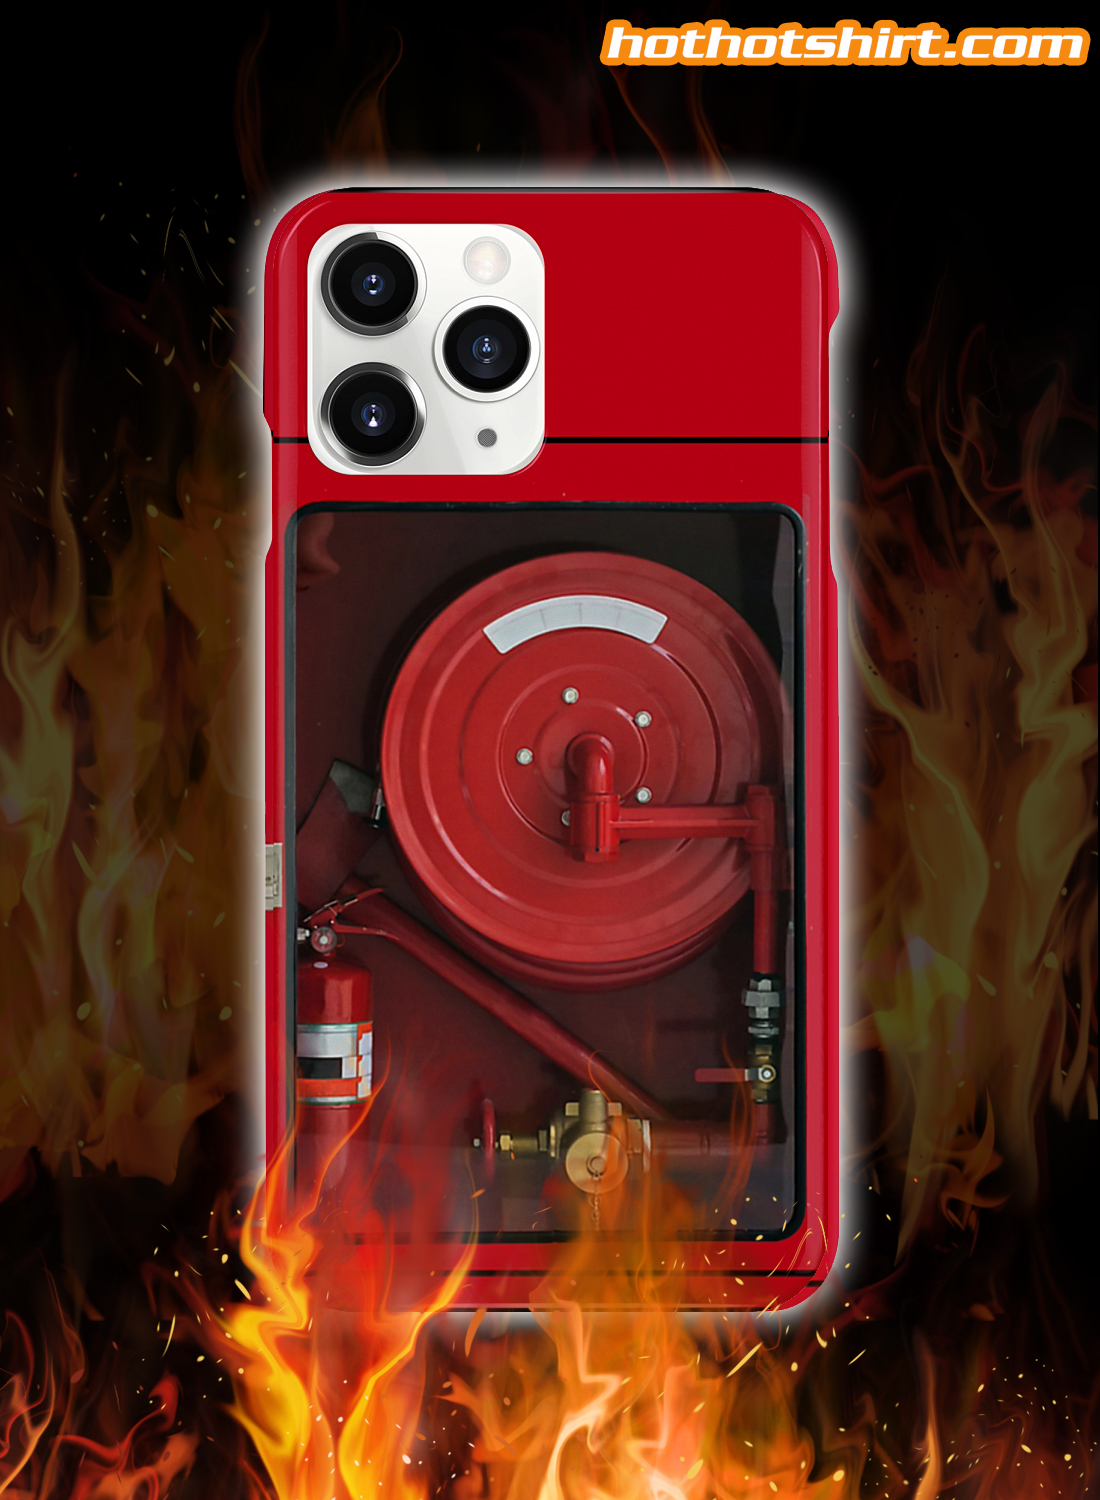 Firefighters hose phone case 1